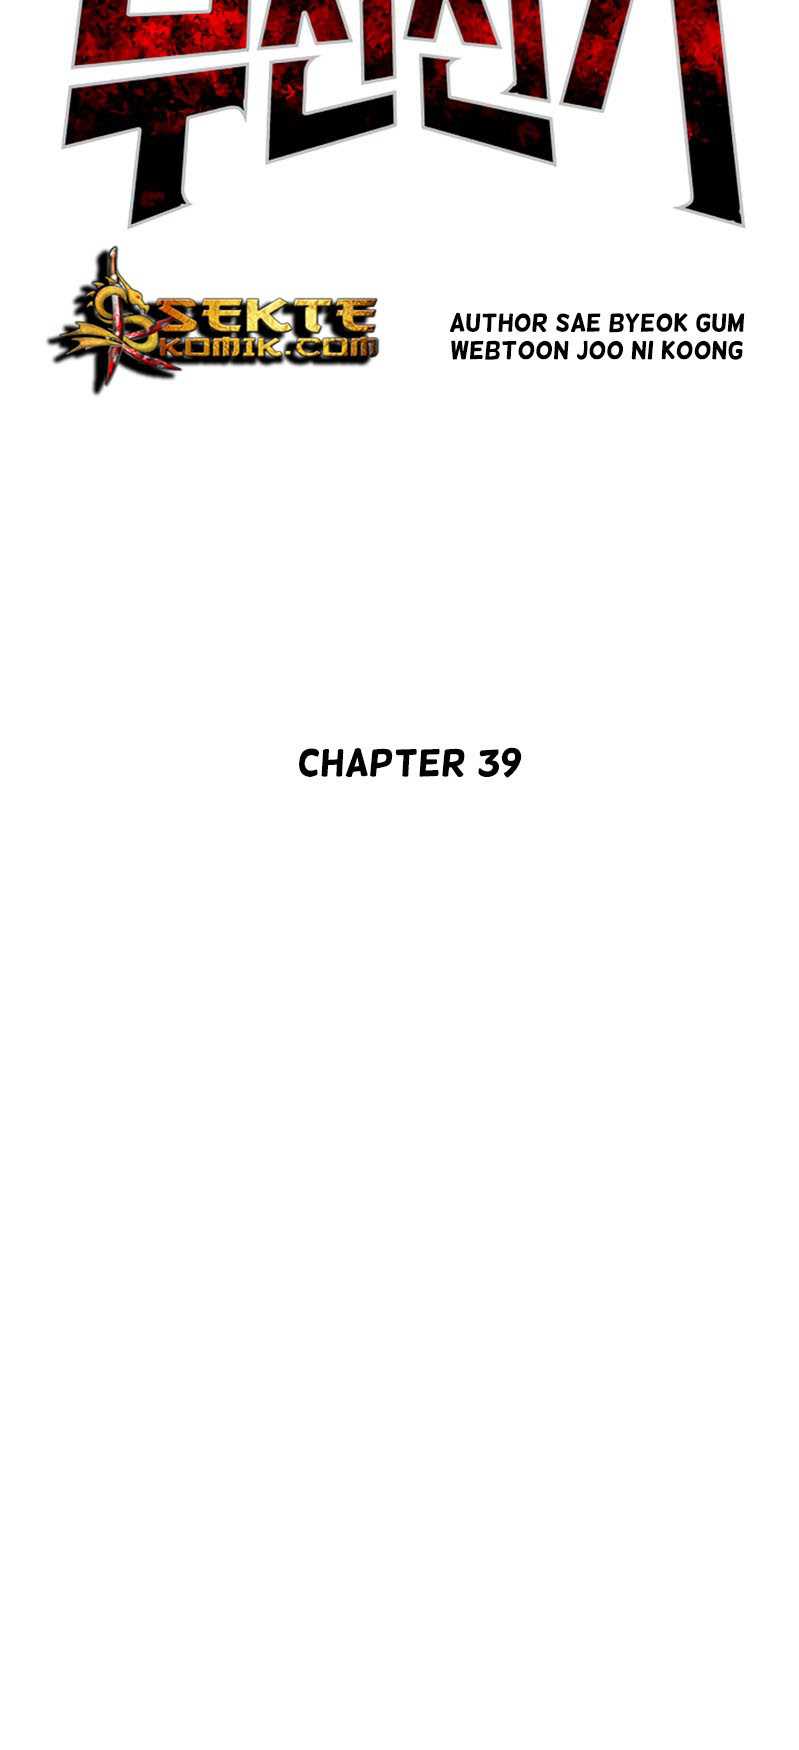 Record of the War God Chapter 39